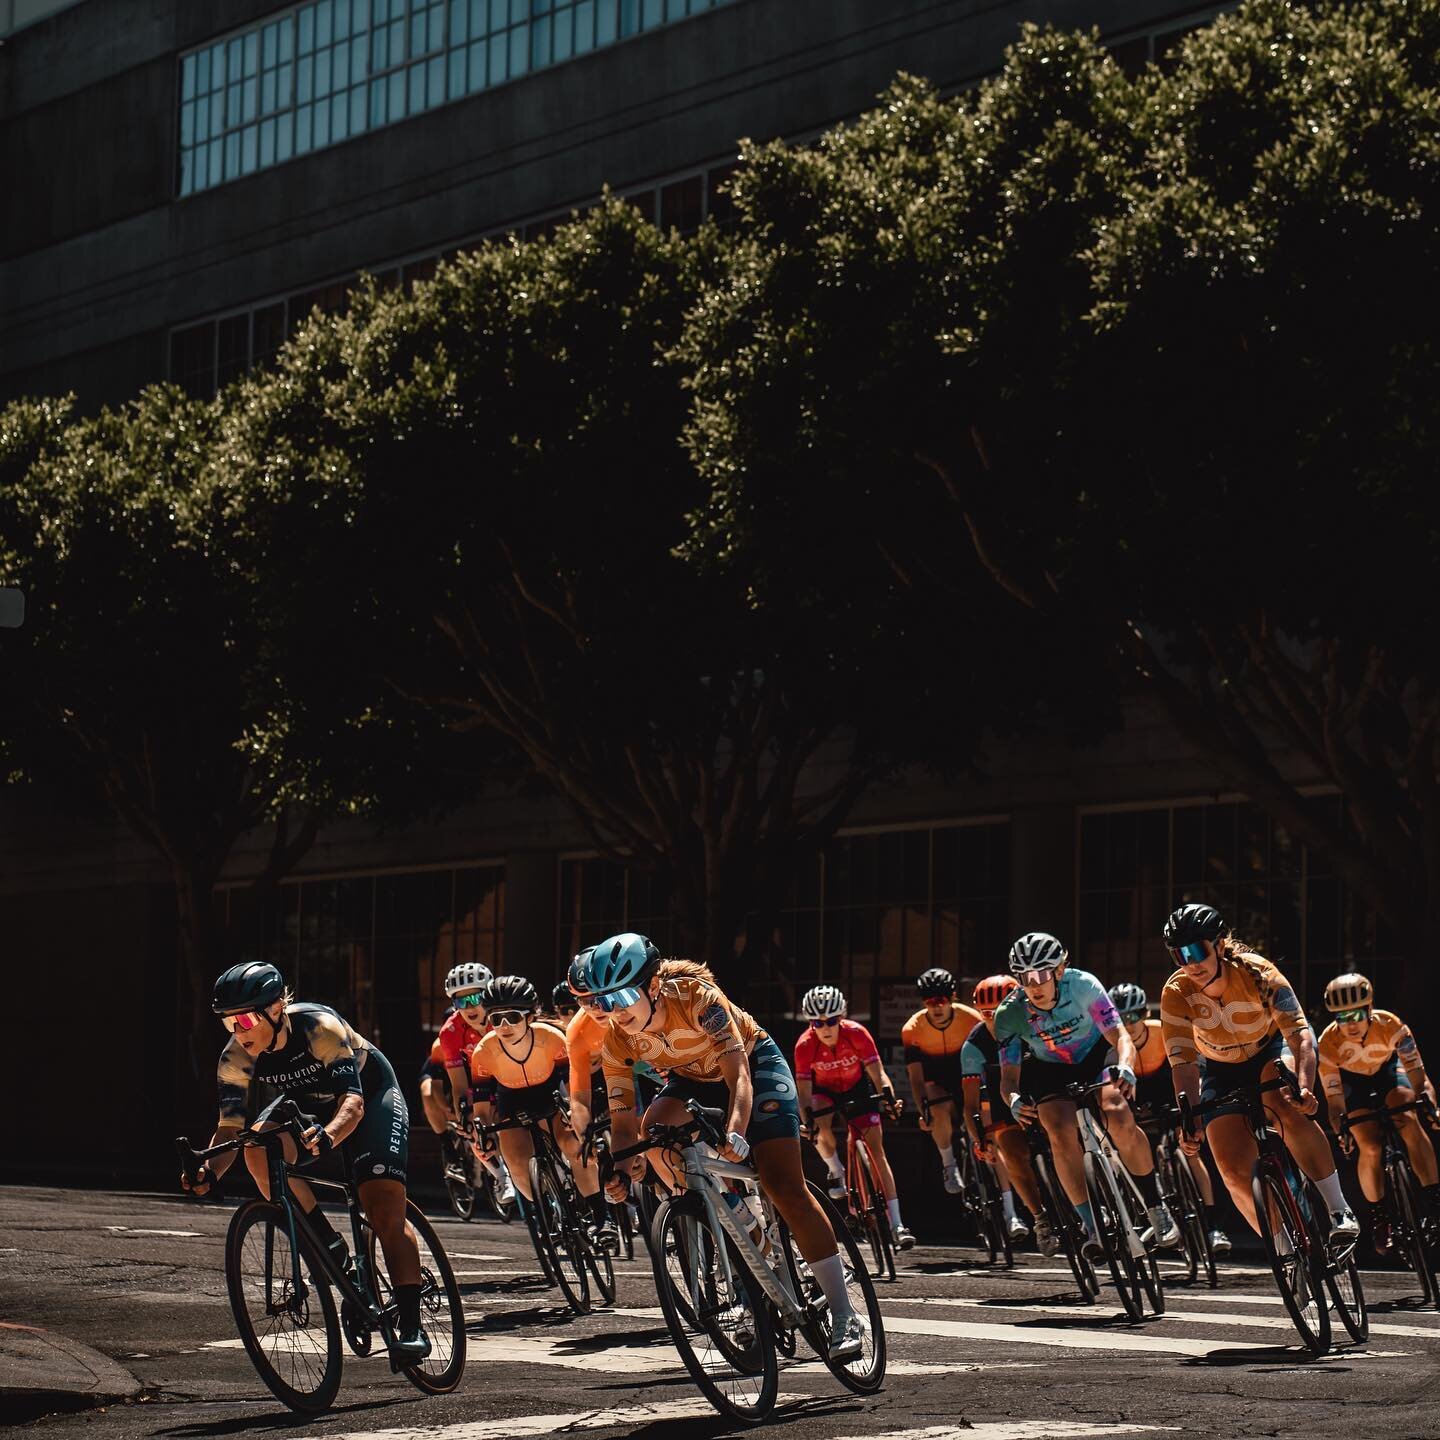 Congratulations on the team for putting in some WORK on Labor Day at the Giro di San Francisco!

We&rsquo;ll see you at Oakland Grand Prix next weekend!

📷 cred to @pamo.gif, @claytonketner, &amp; @chloe_jooni